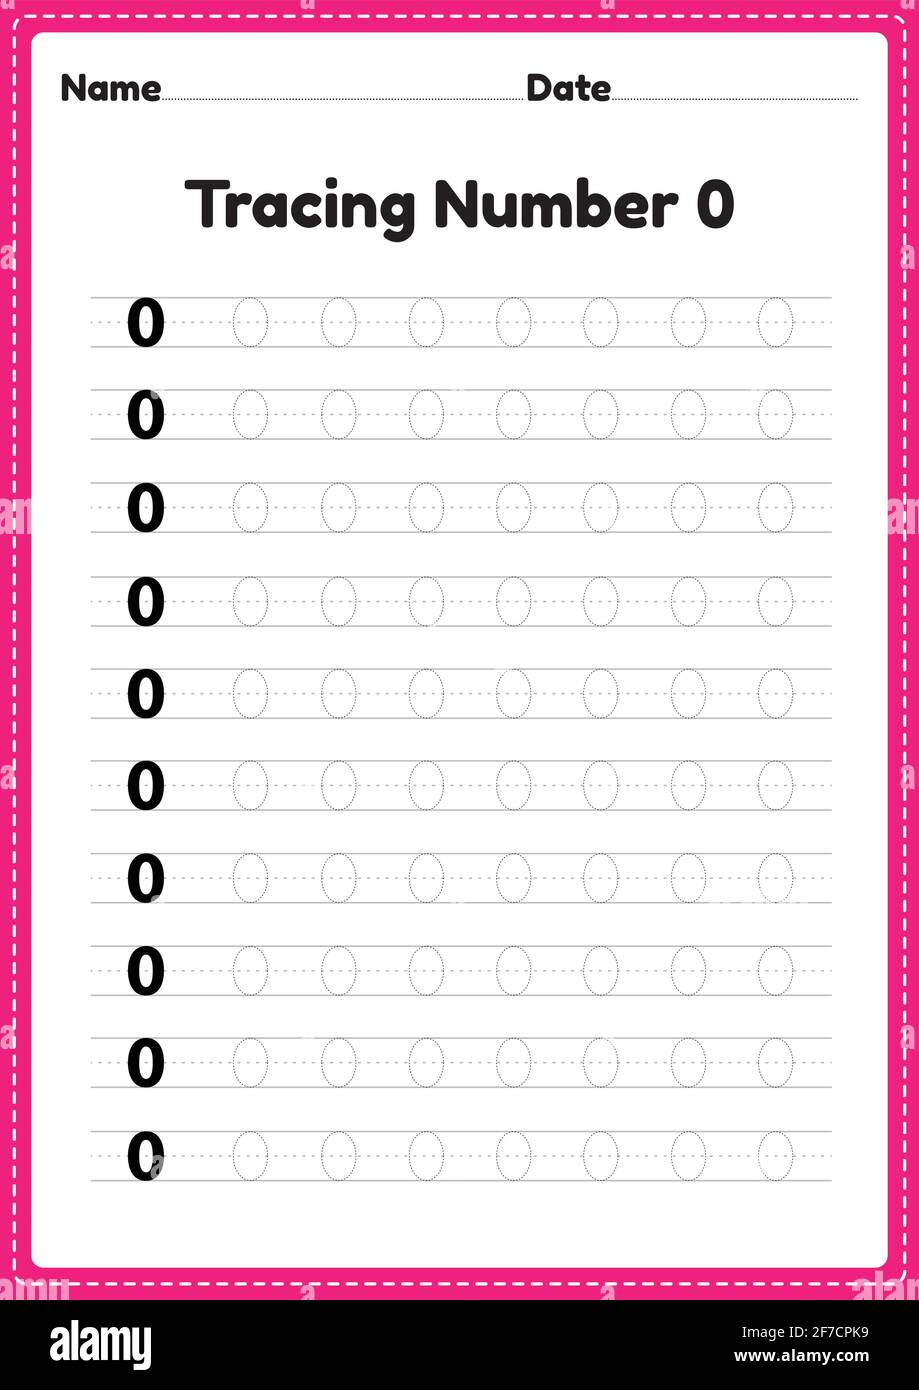 Tracing number 0 worksheet for kindergarten and preschool kids for educational handwriting practice in a printable page. Stock Vector